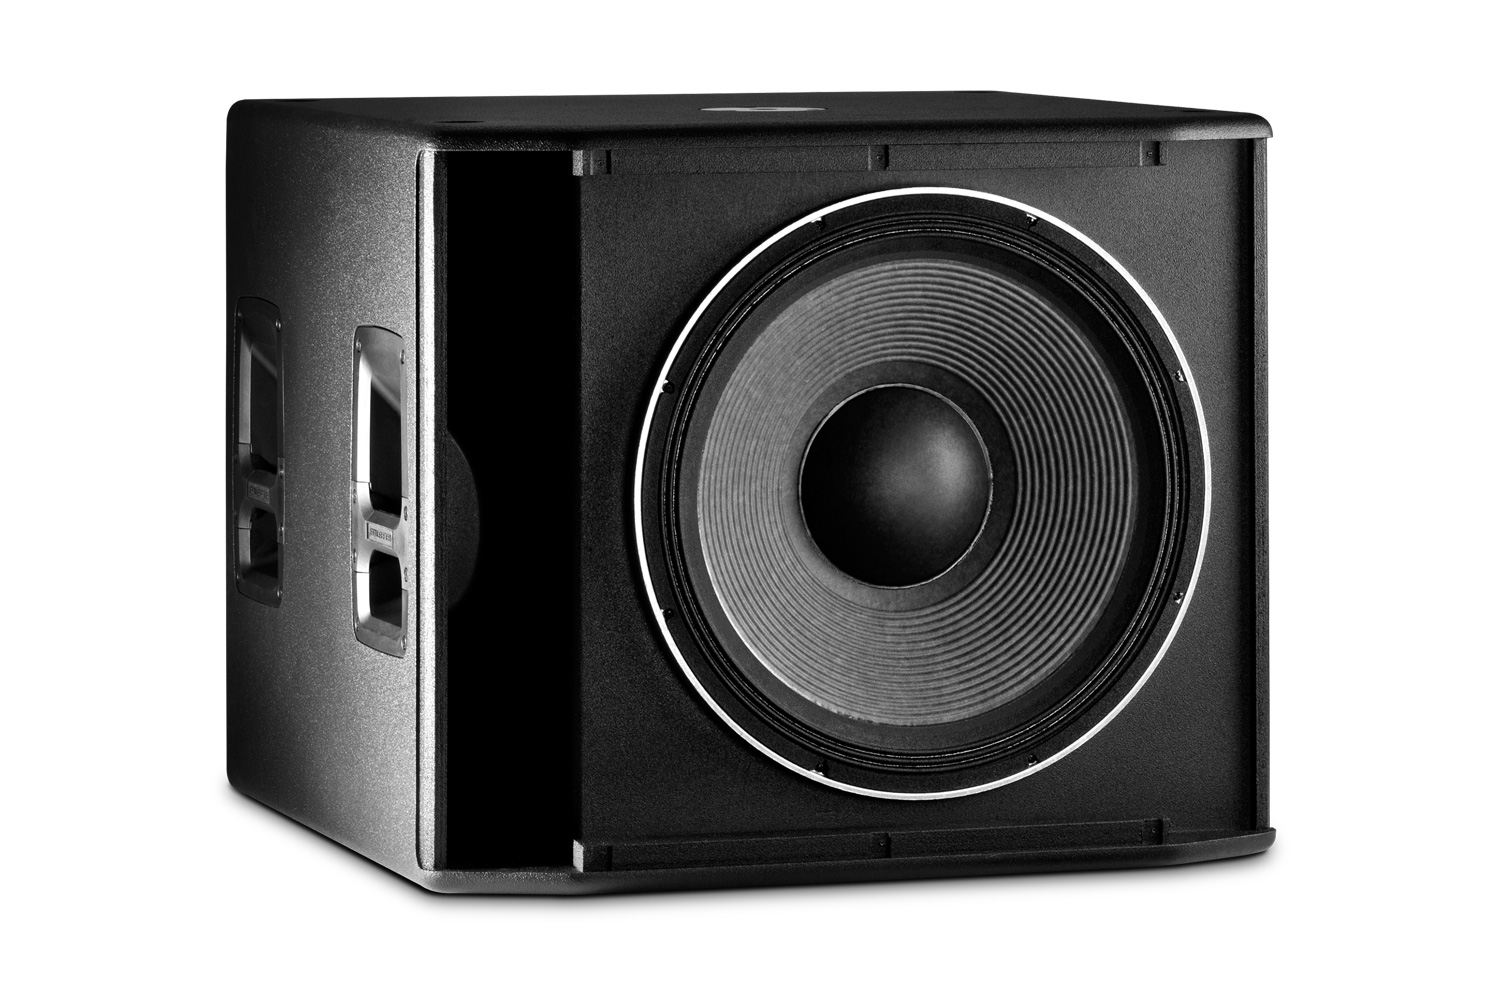 JBL SRX818SP - 18" 2000W Powered Subwoofer With DSP